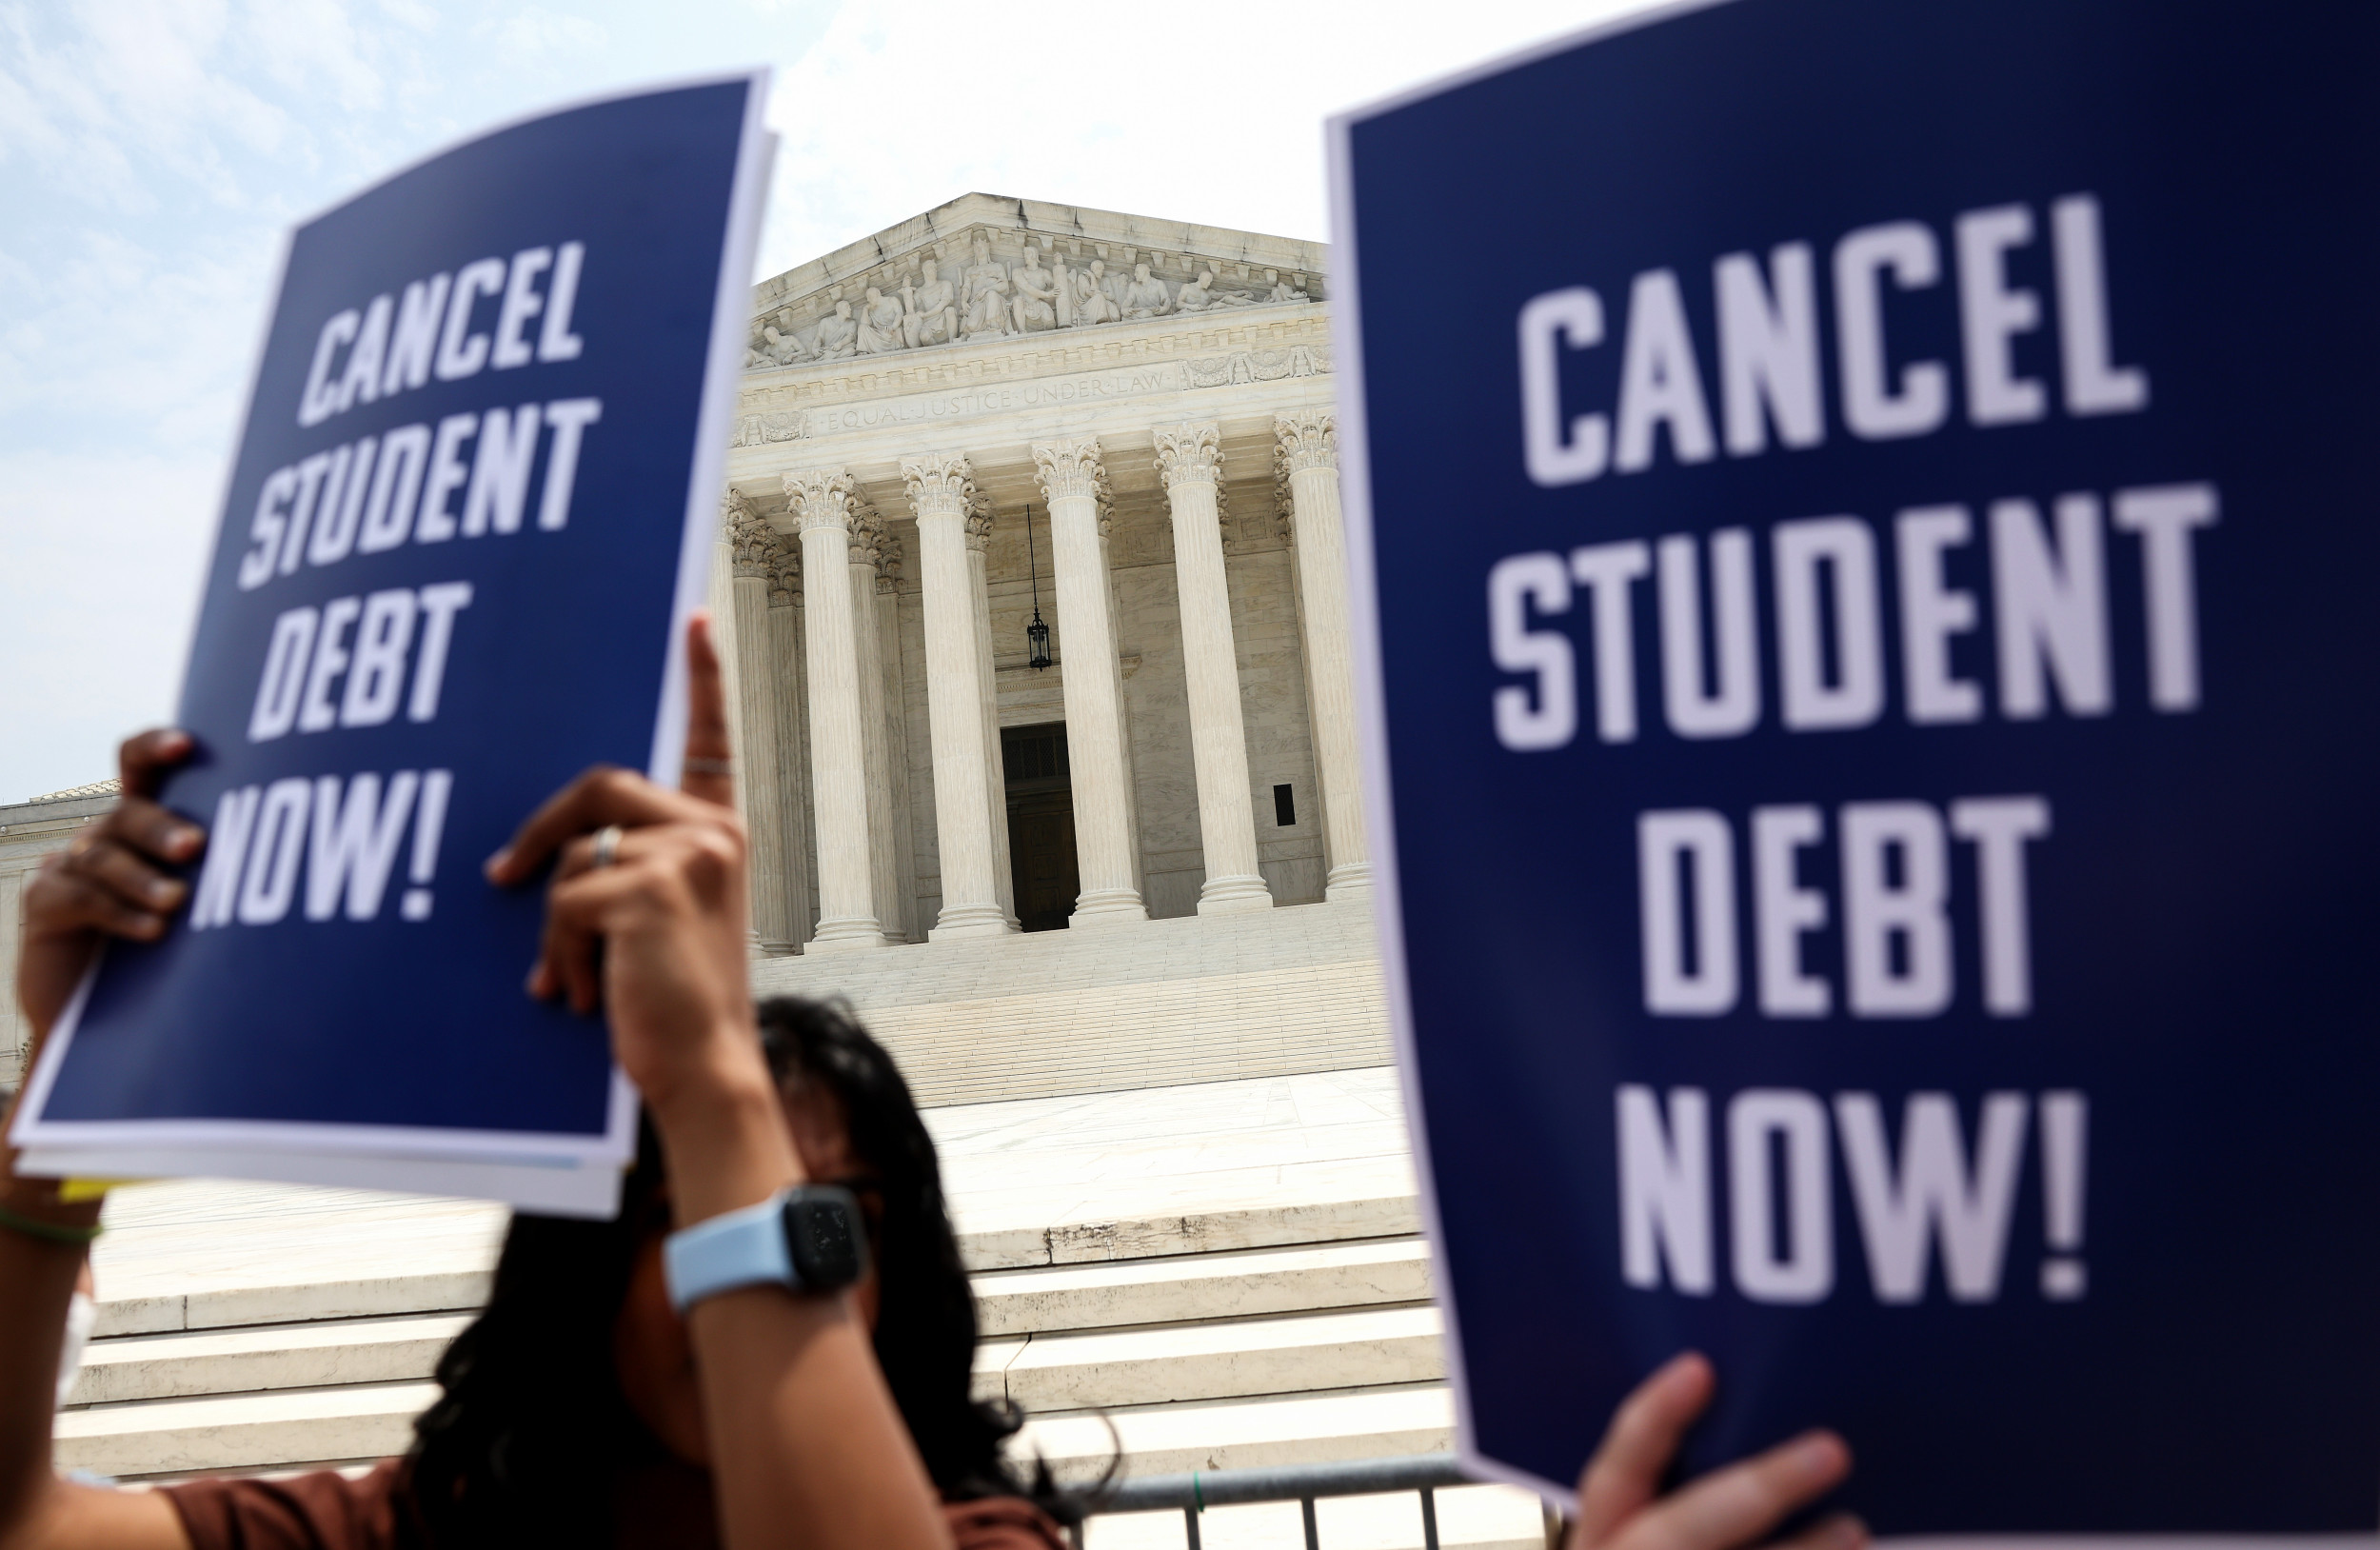 New student loan deferral plan aims to help sexual assault survivors